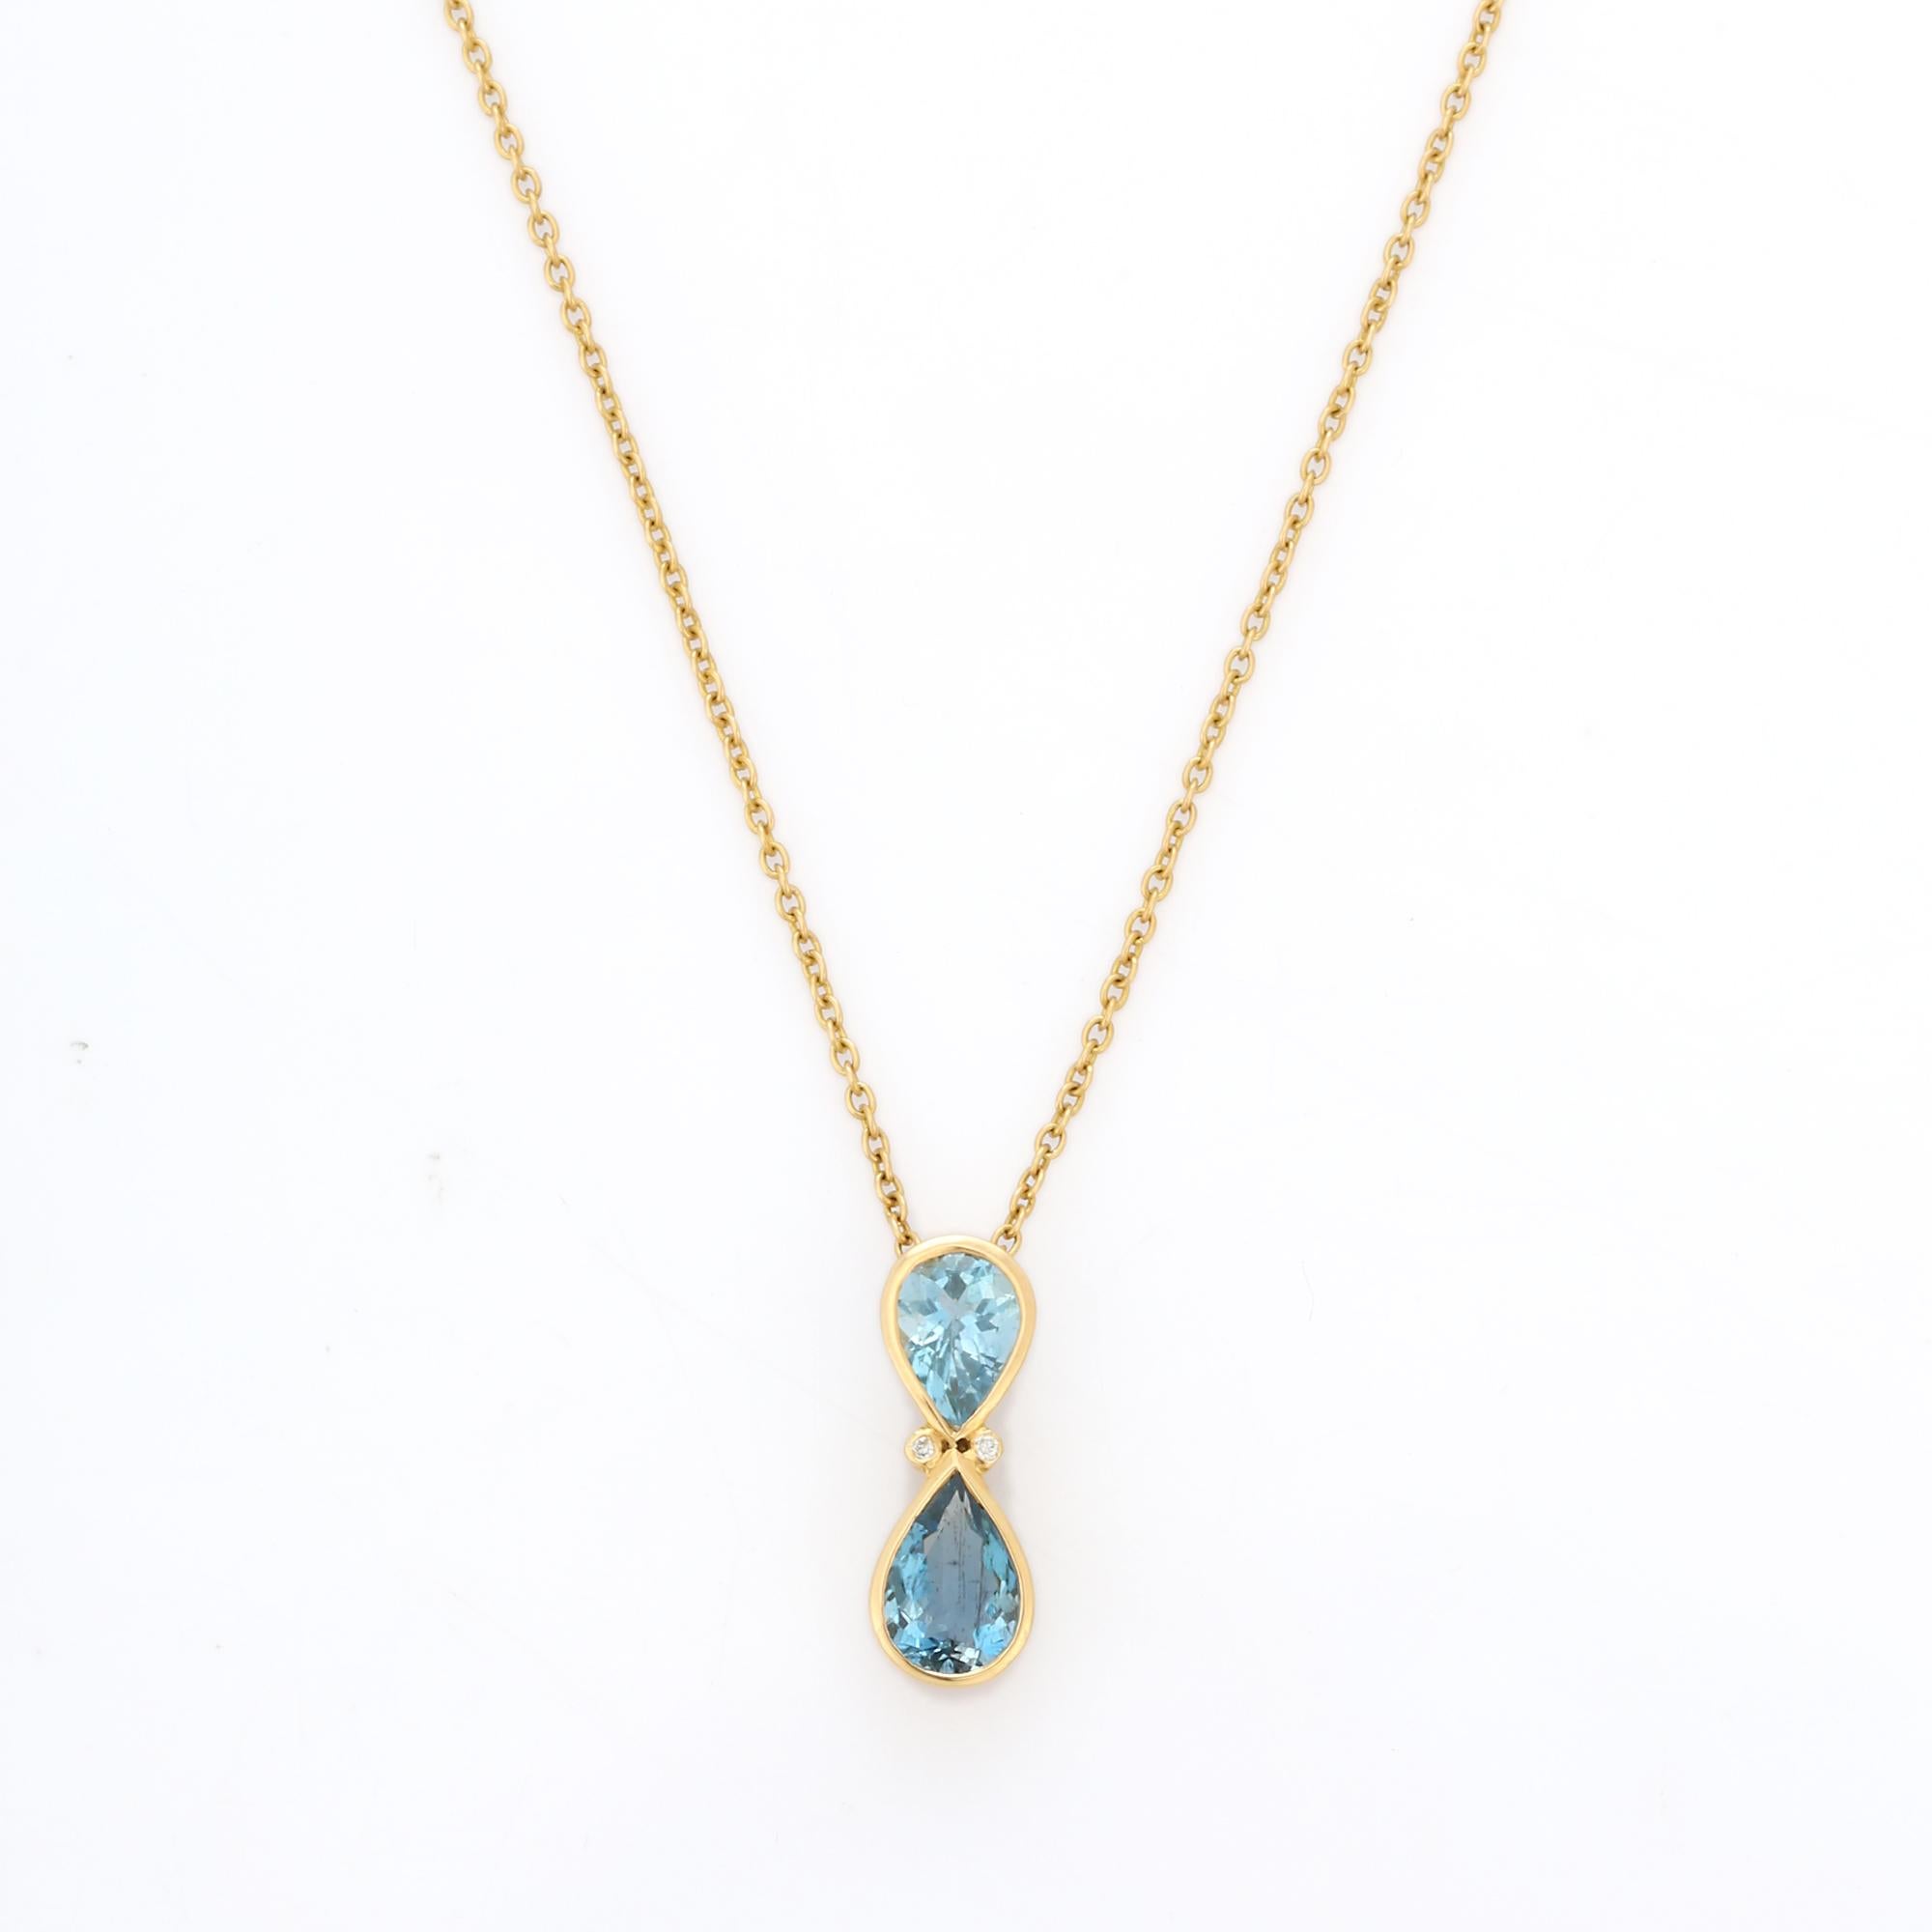 Blue Topaz Necklace in 18K Gold studded with pear cut Topaz.
Accessorize your look with this elegant Topaz pendant chain necklace. This stunning piece of jewelry instantly elevates a casual look or dressy outfit. Comfortable and easy to wear, it is